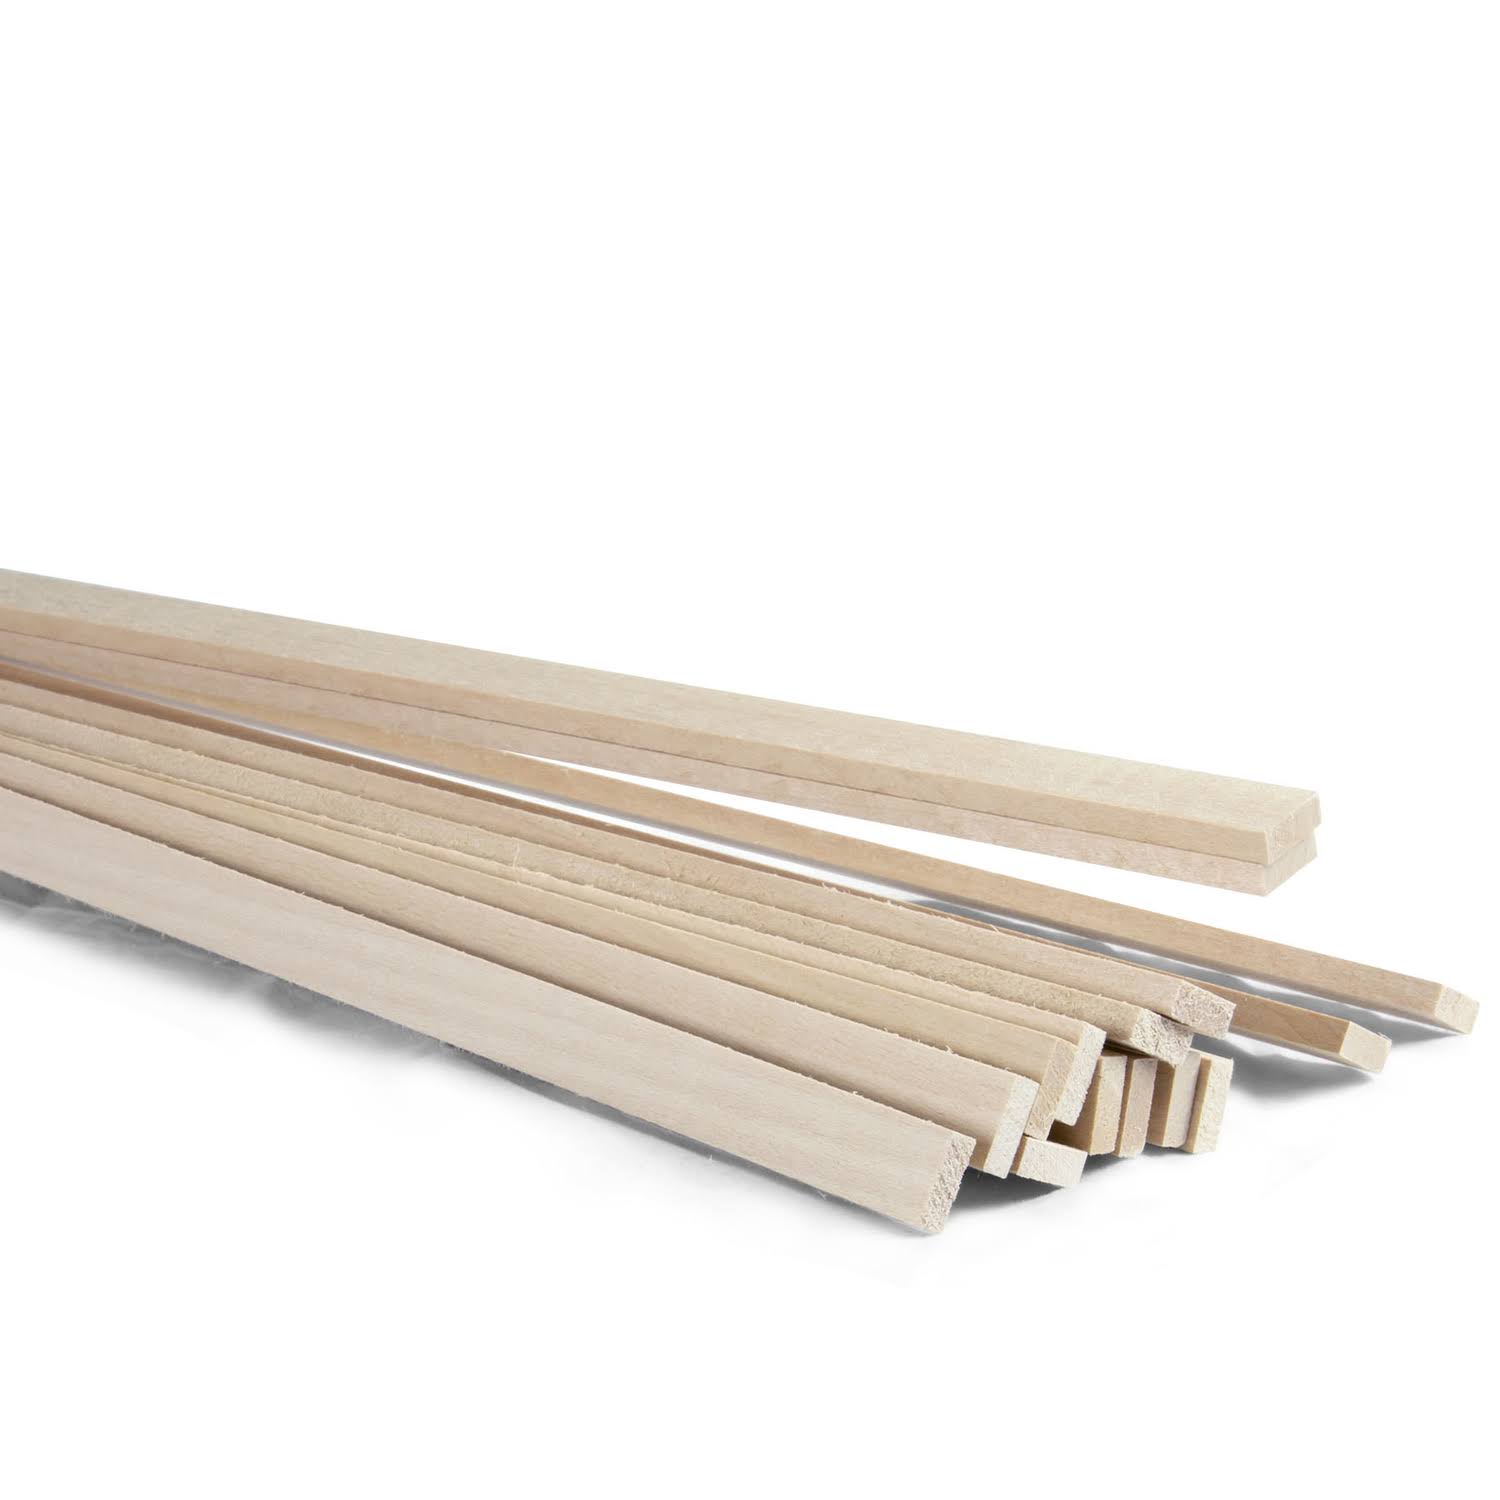 Midwest Basswood Strip - 3/16 x 1/2 x 24 in